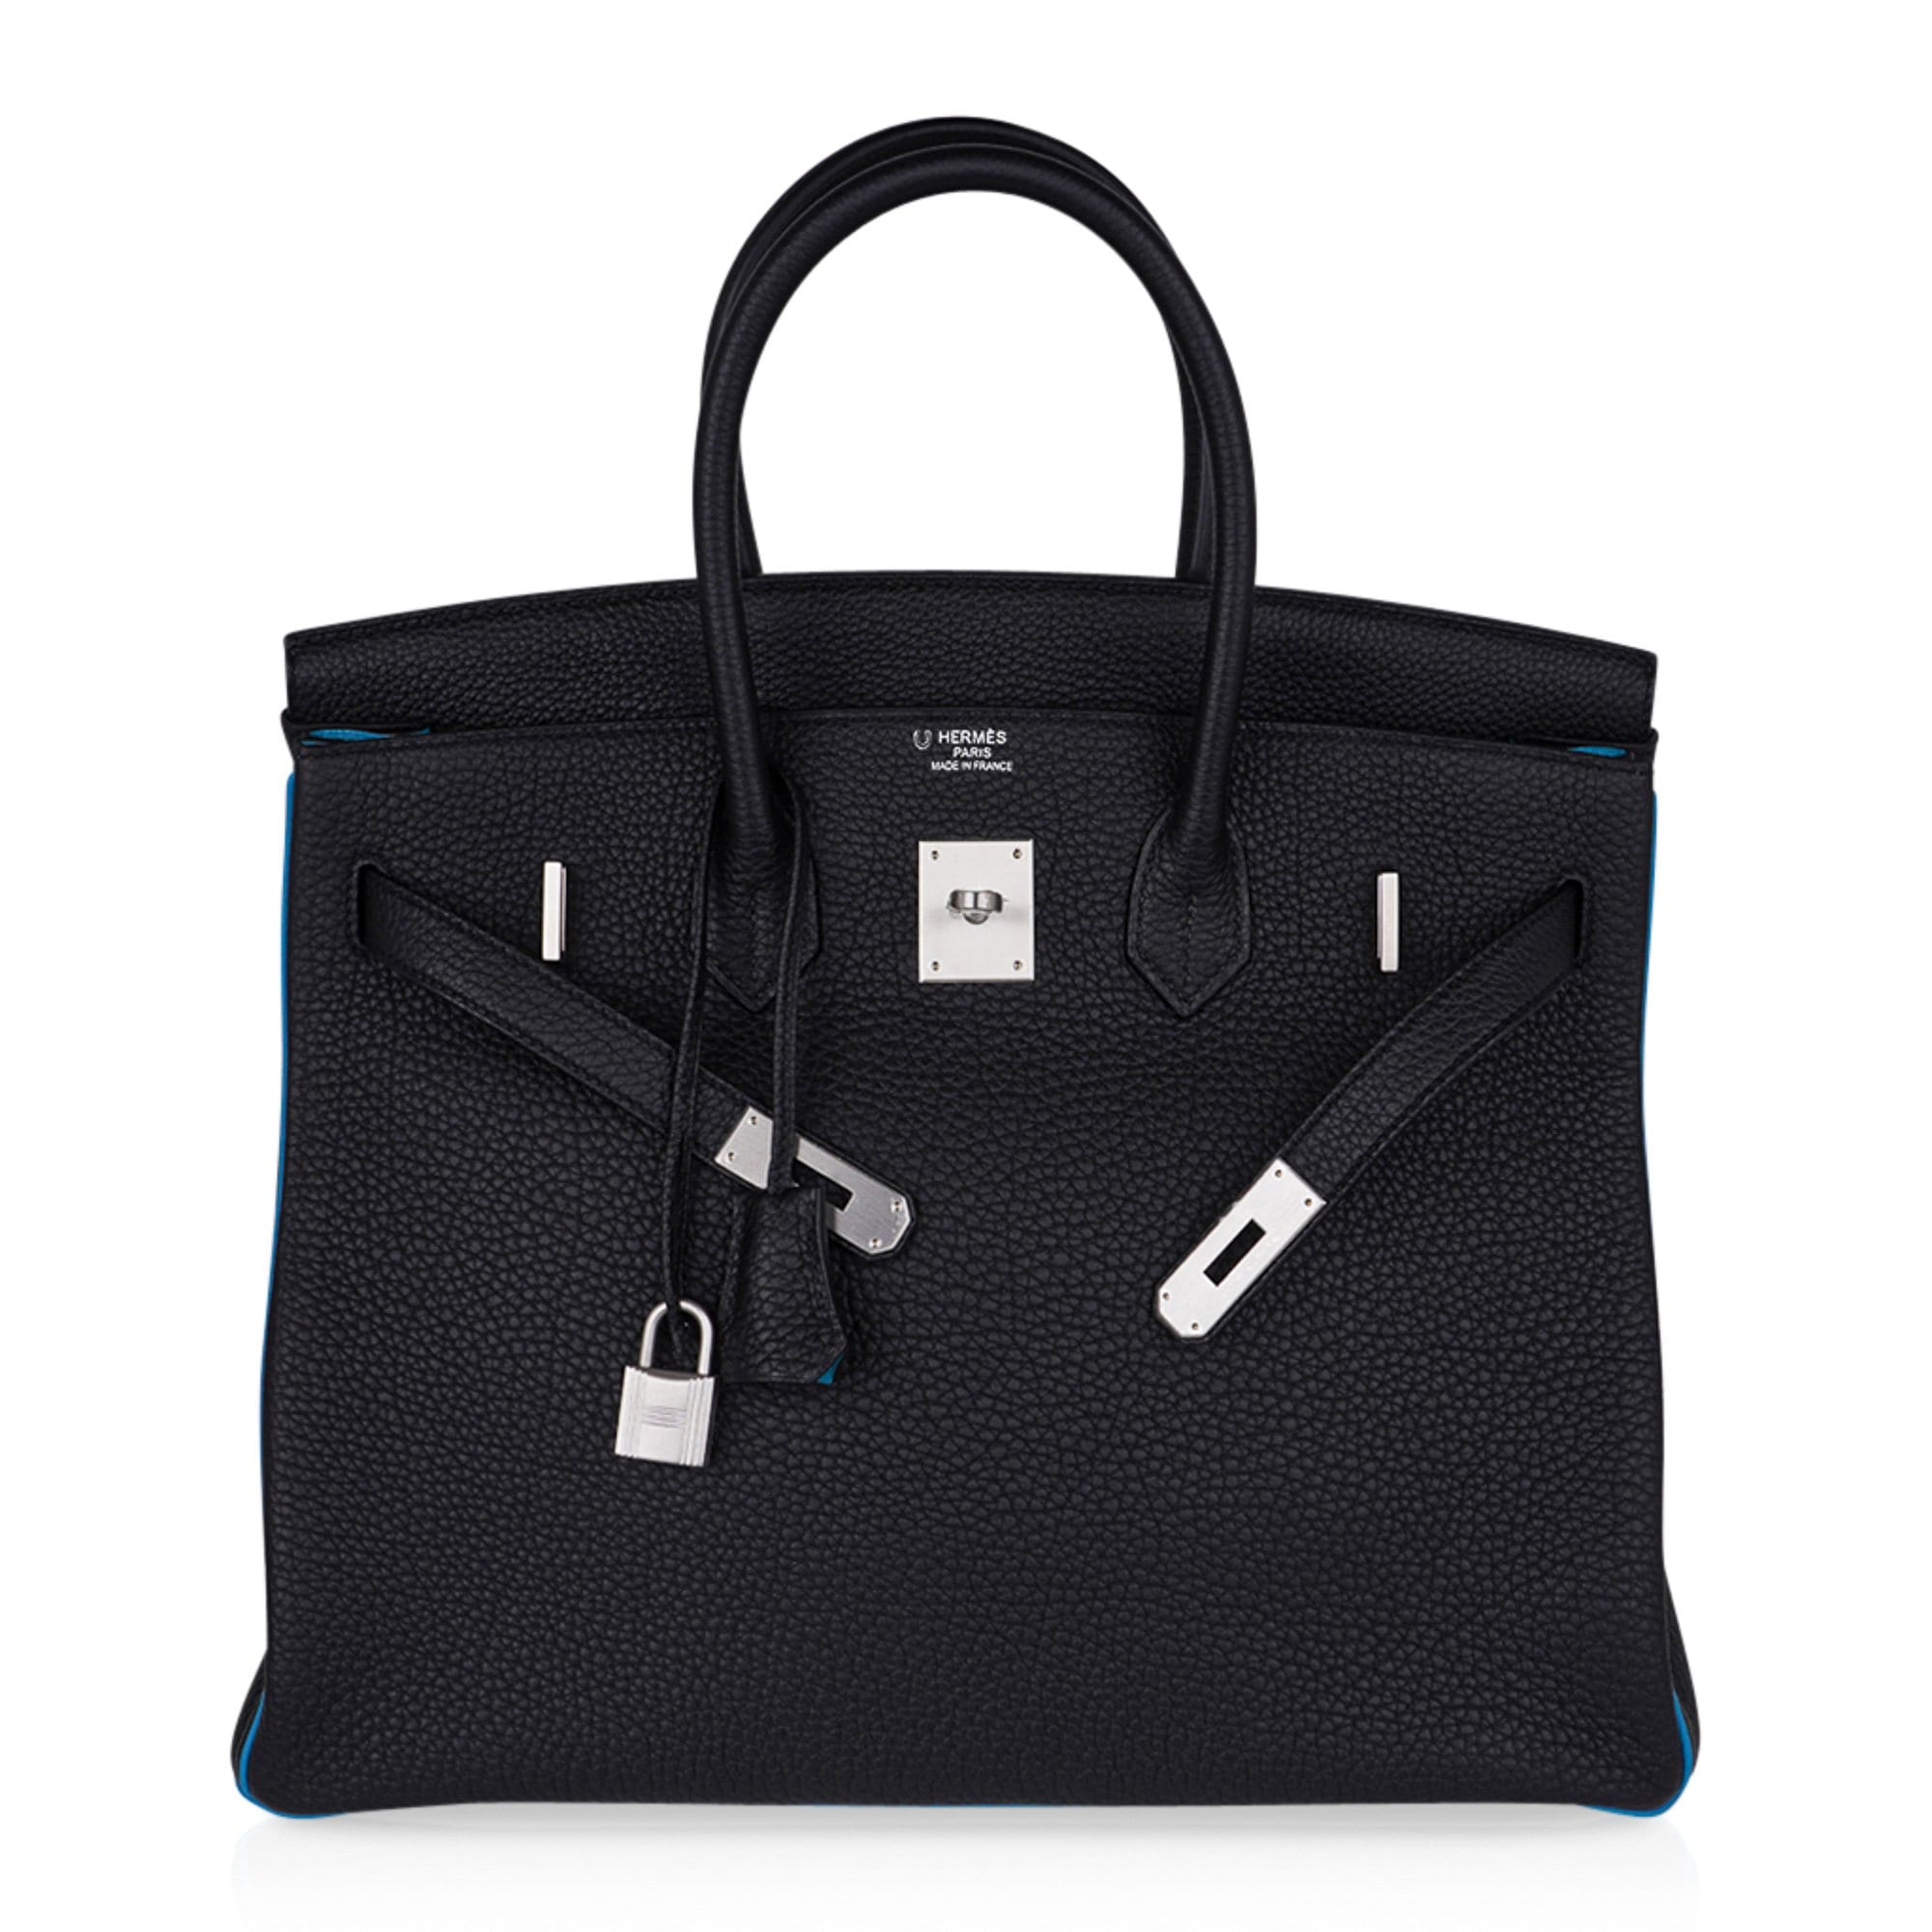 Pre-owned Hermes Special Order (HSS) Birkin 30 Bleu Turquoise and